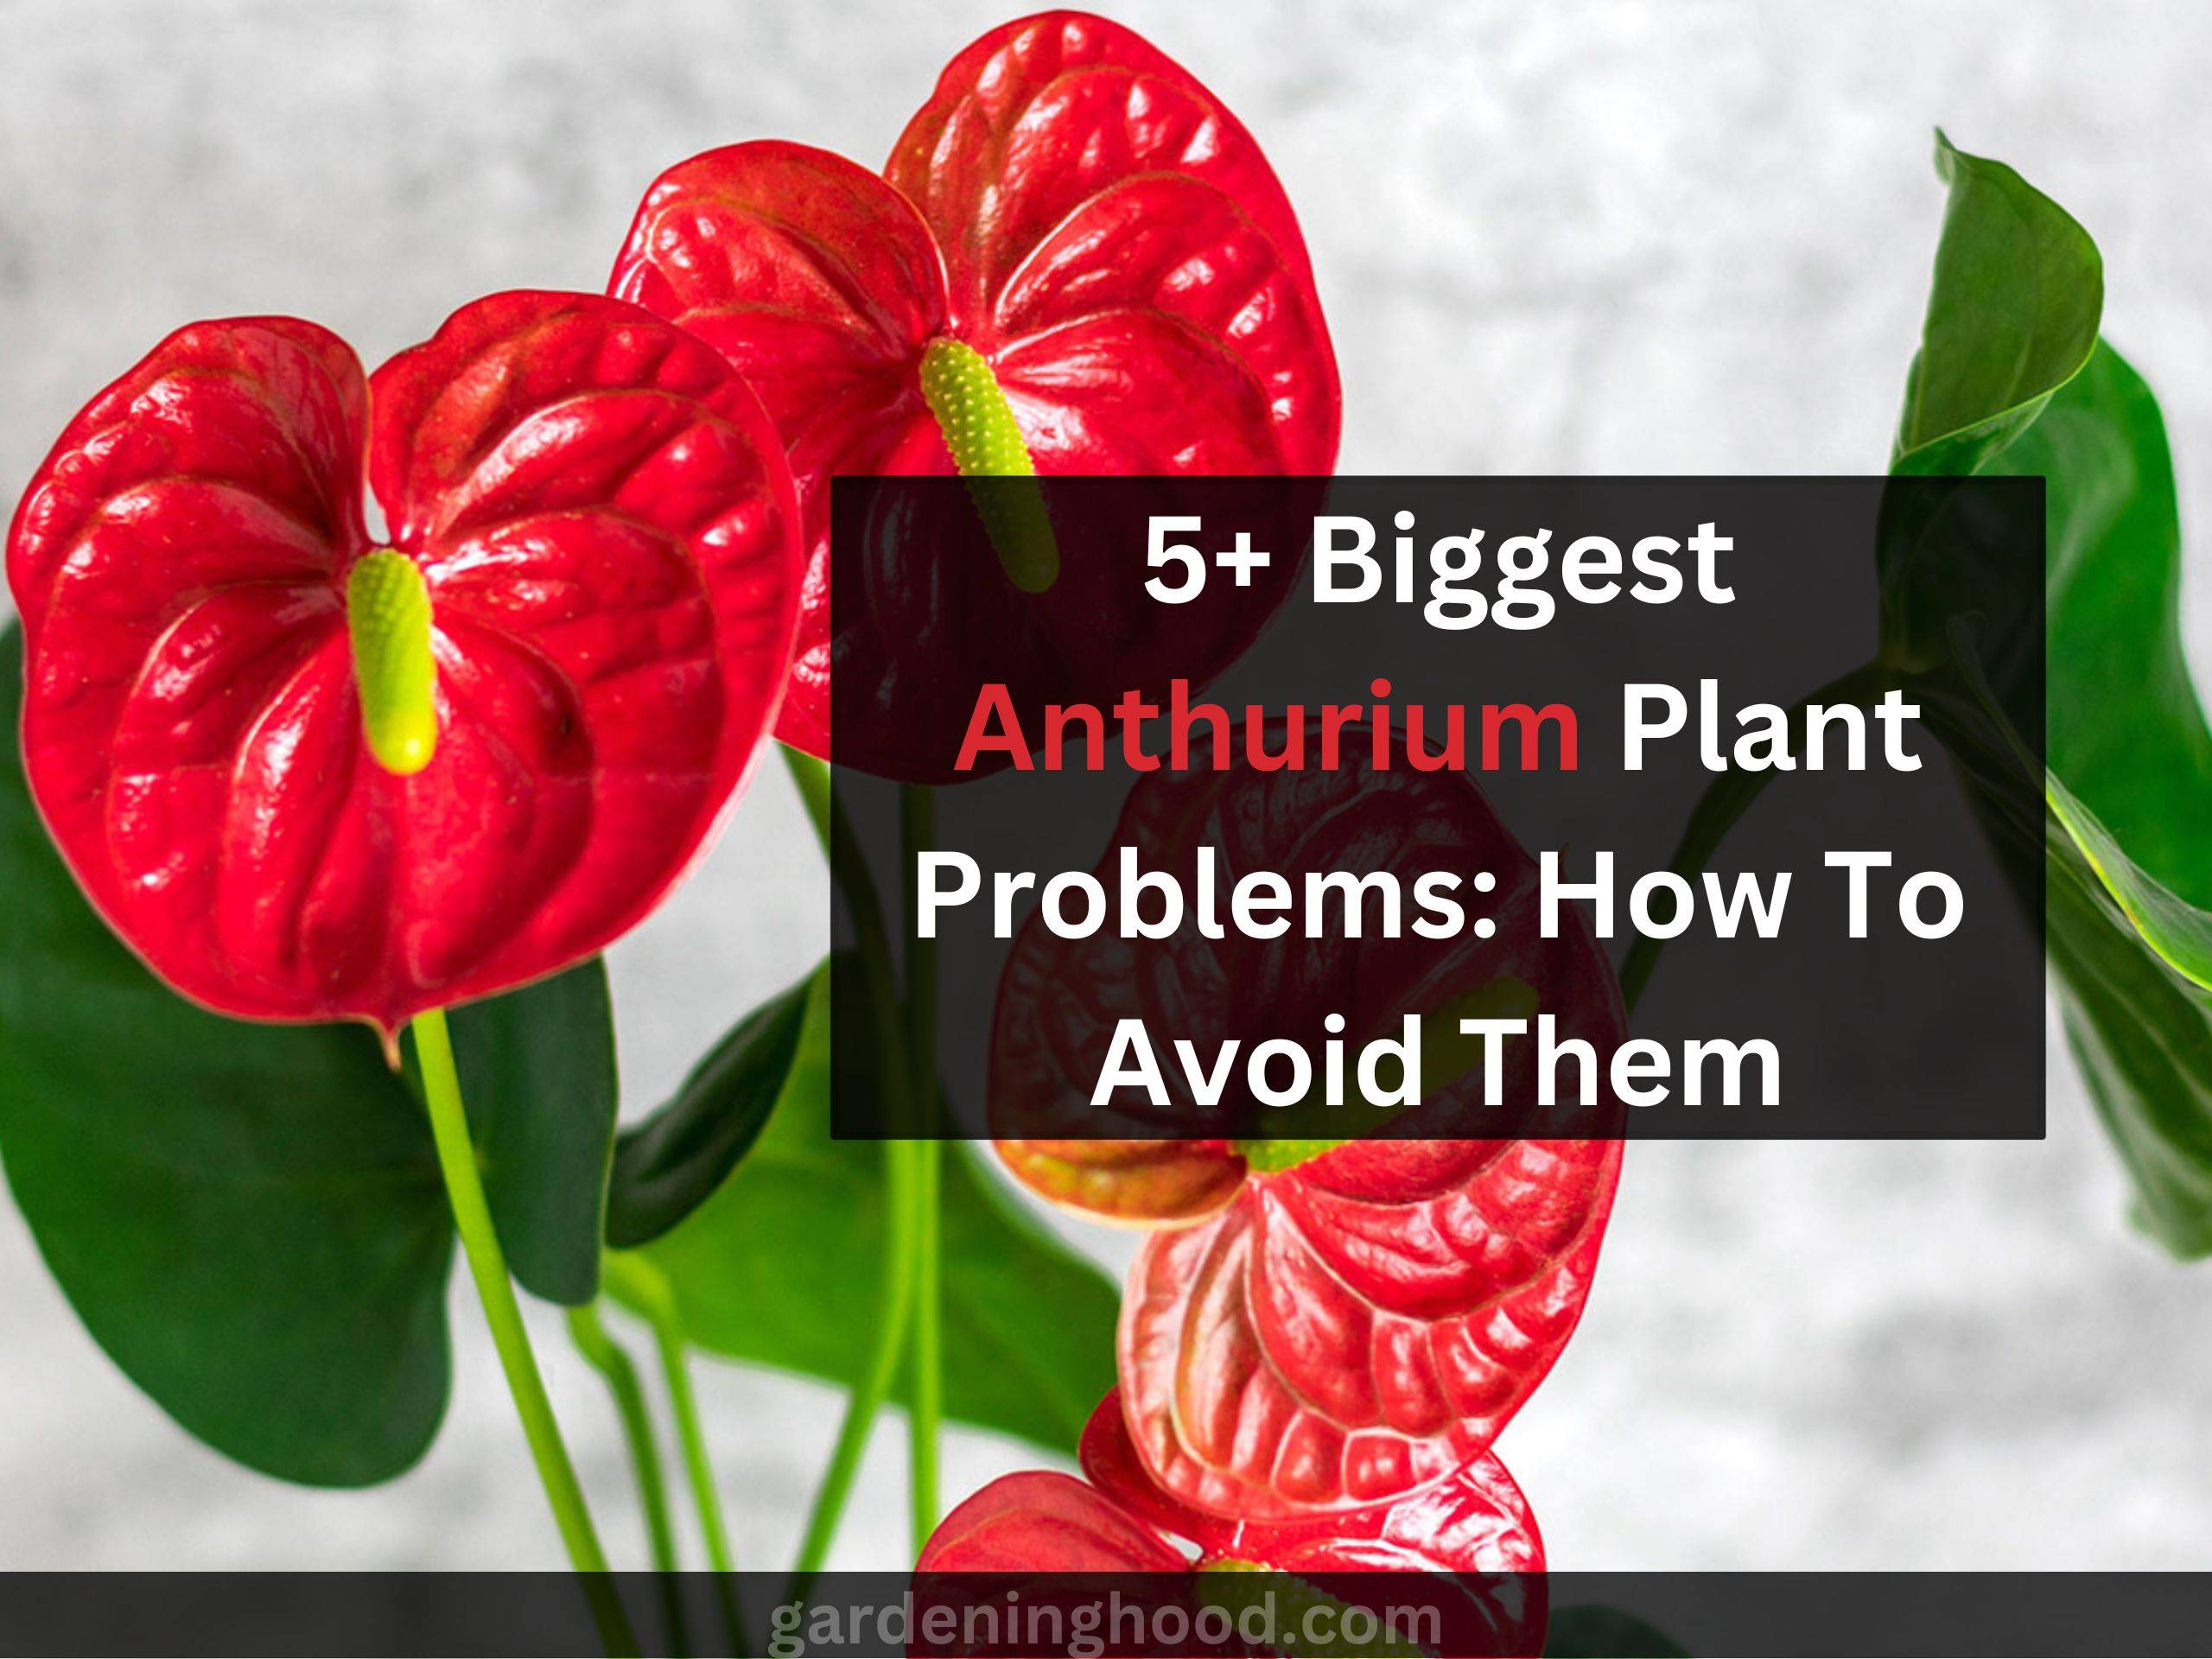 5 Biggest Anthurium Plant Problems: How To Avoid Them